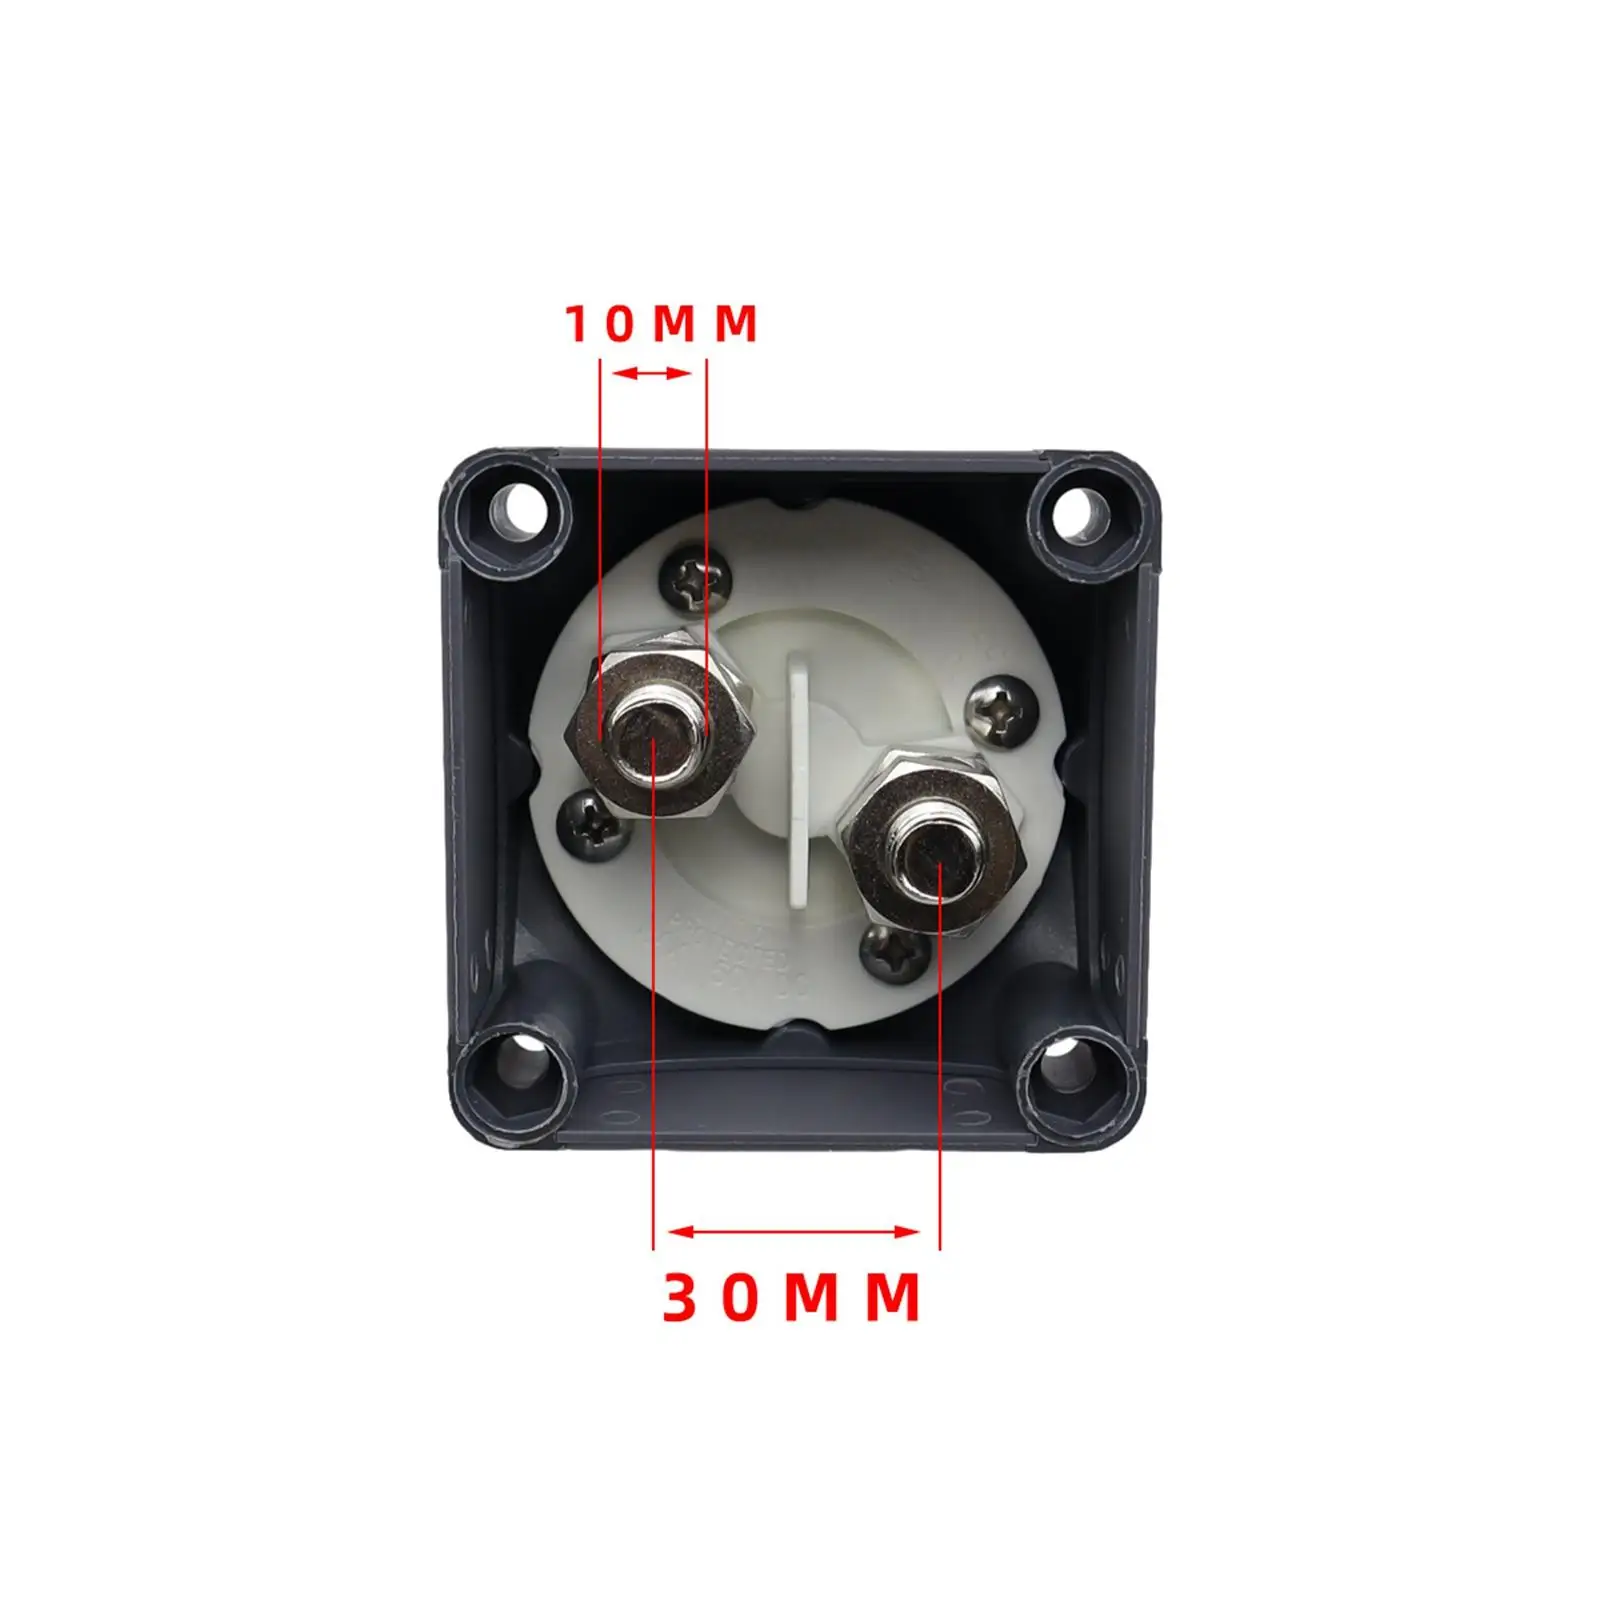 12 to 48V Battery Isolator Disconnect Rotary Switch for Boat Automotive